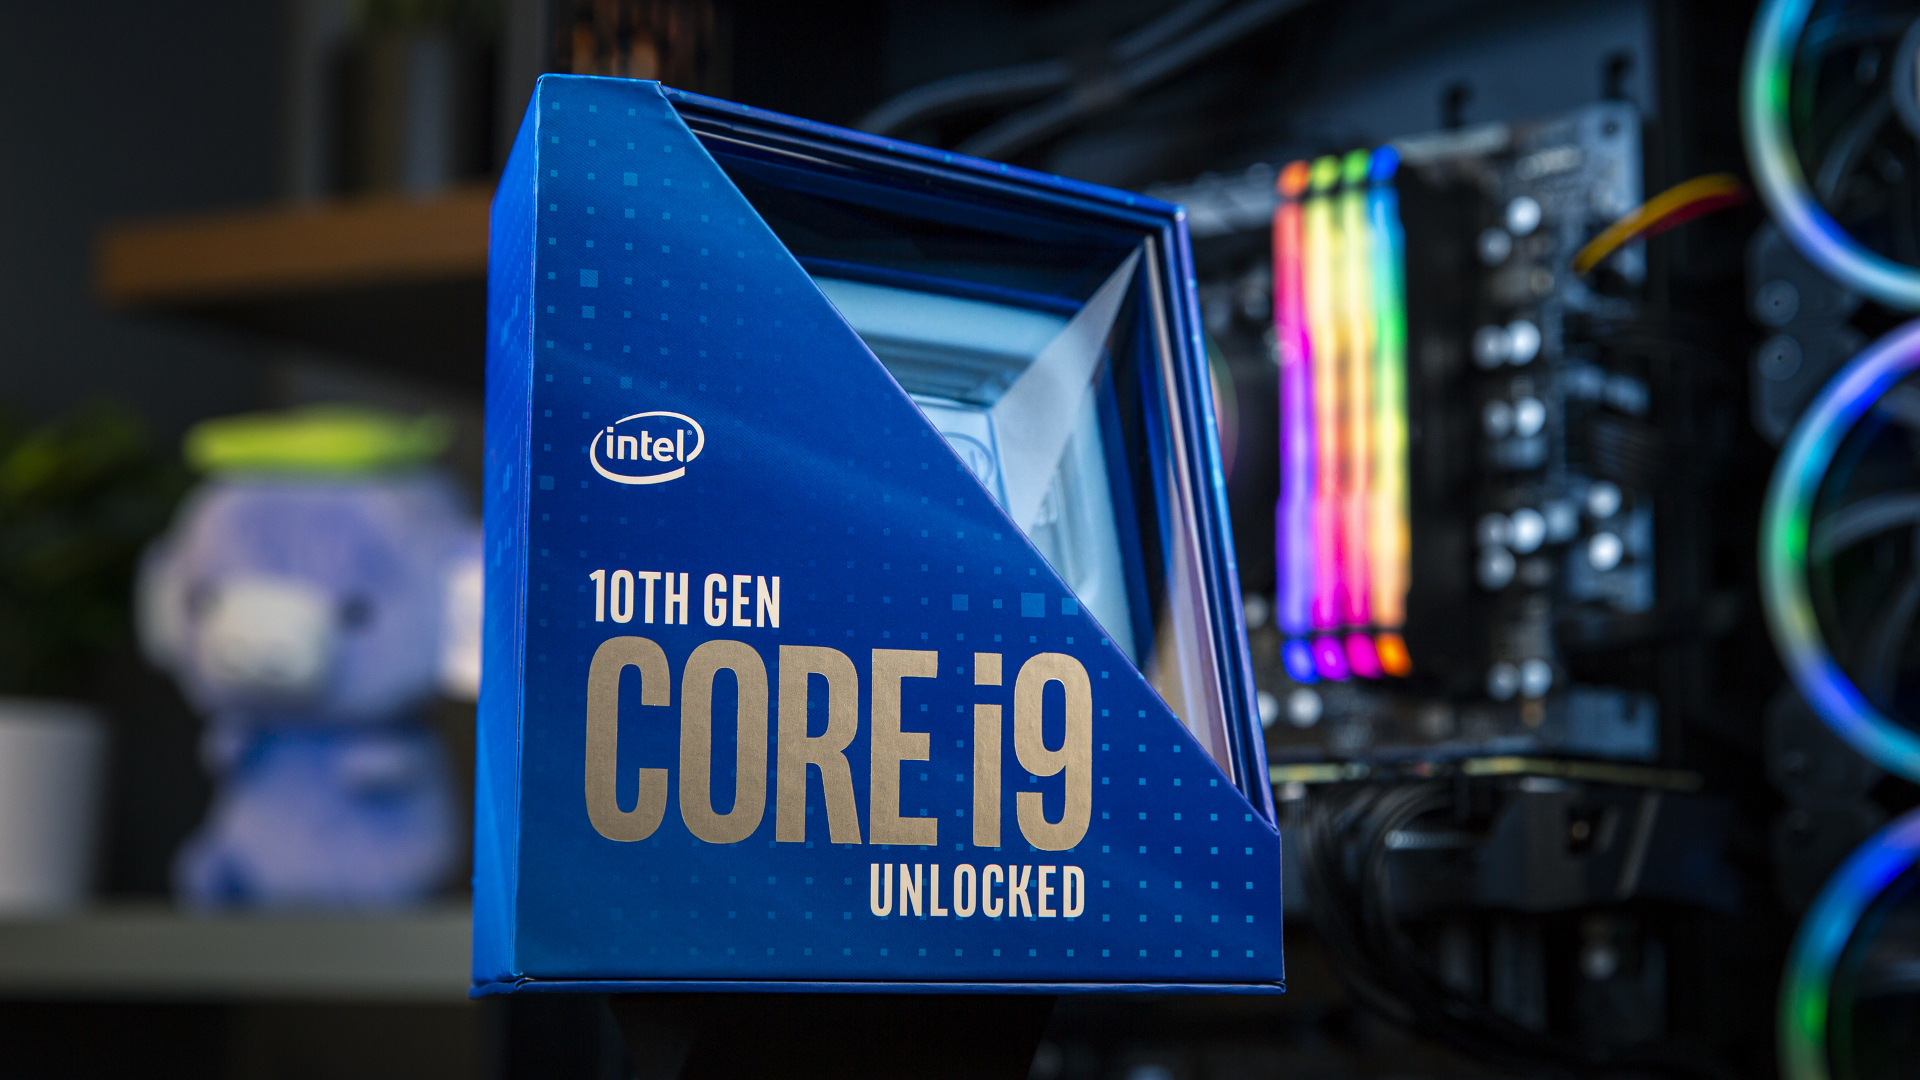 Intel Core I9 10850k Shows Up Online And Could Cause Some Core